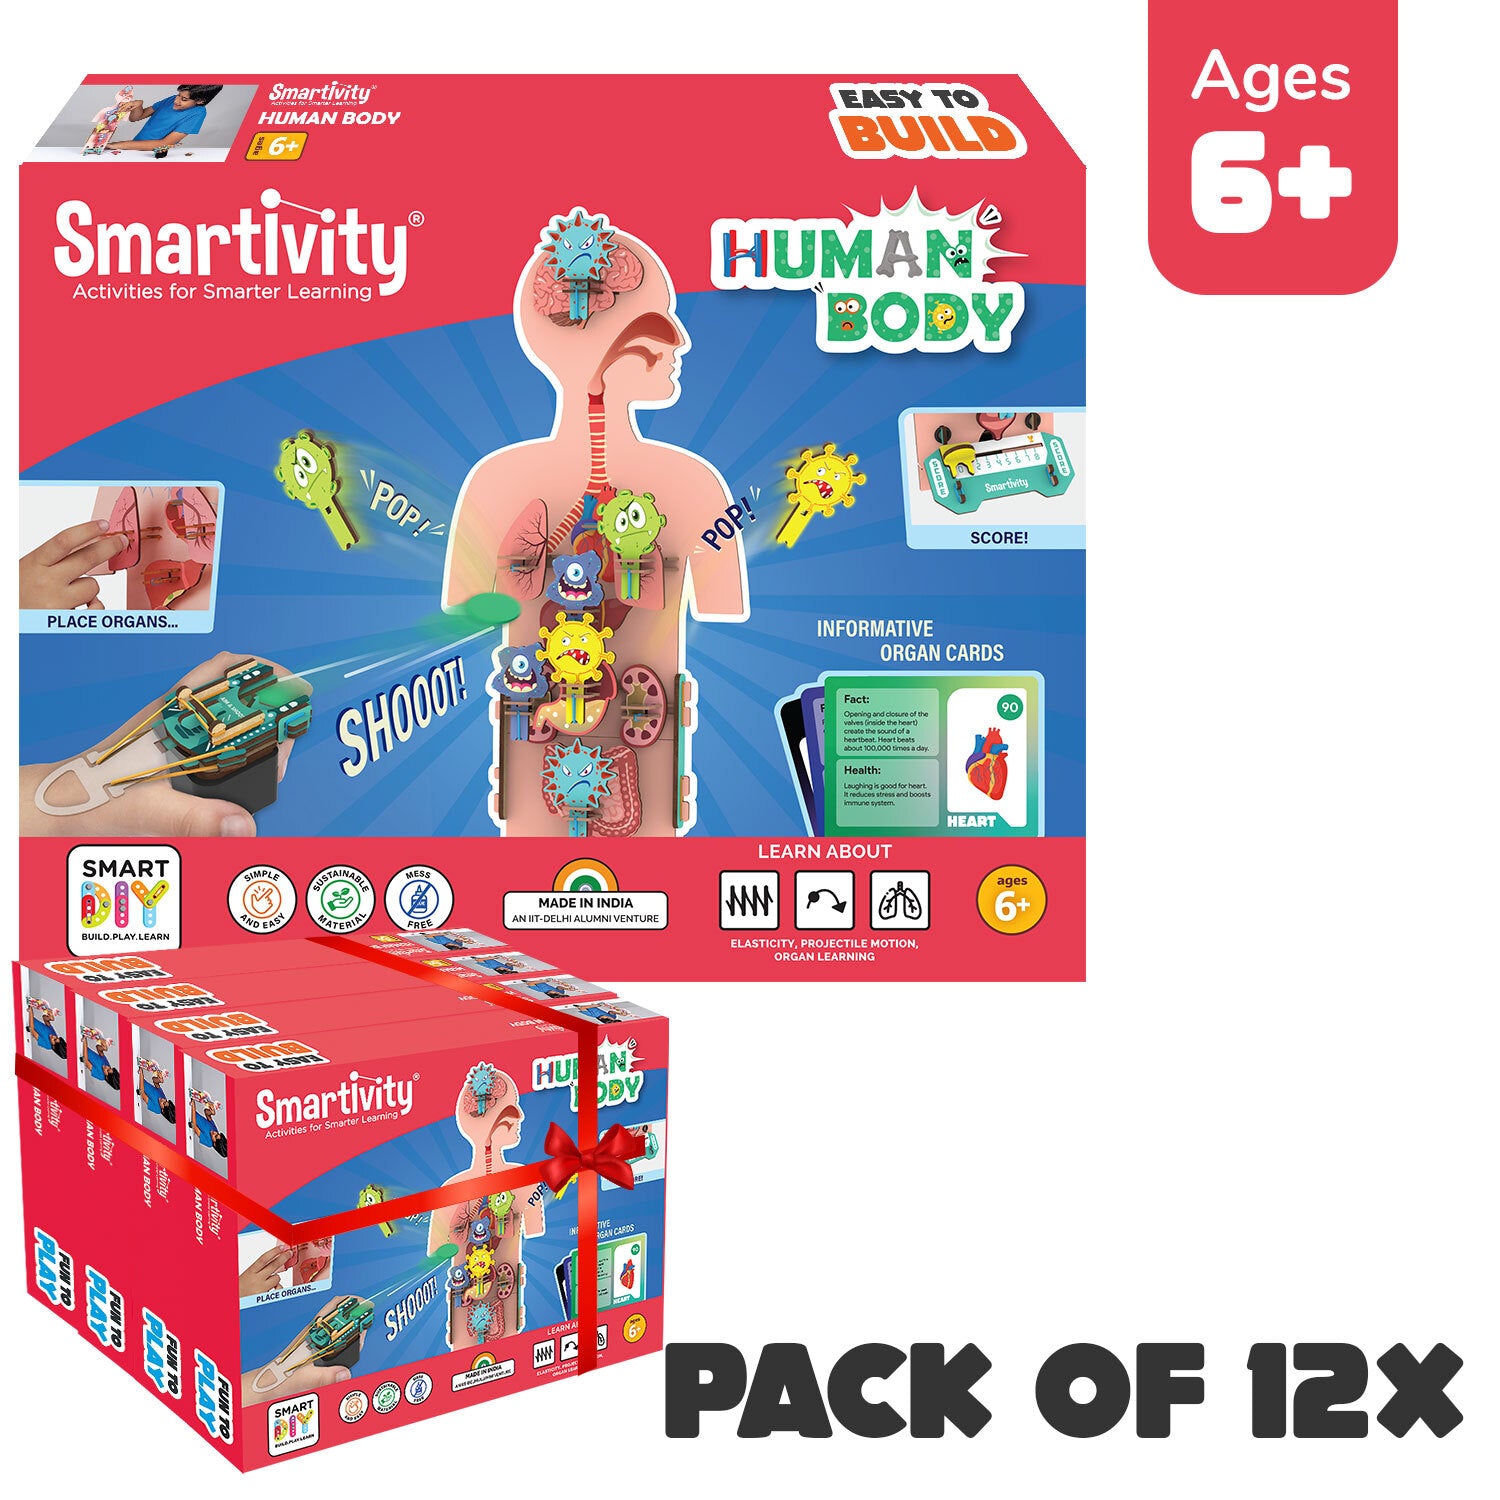 Human Body| A Pack of 12 x 1 Units| Build-it-Yourself 3D Models of Human Body| Perfect Gifts for Curious Kids